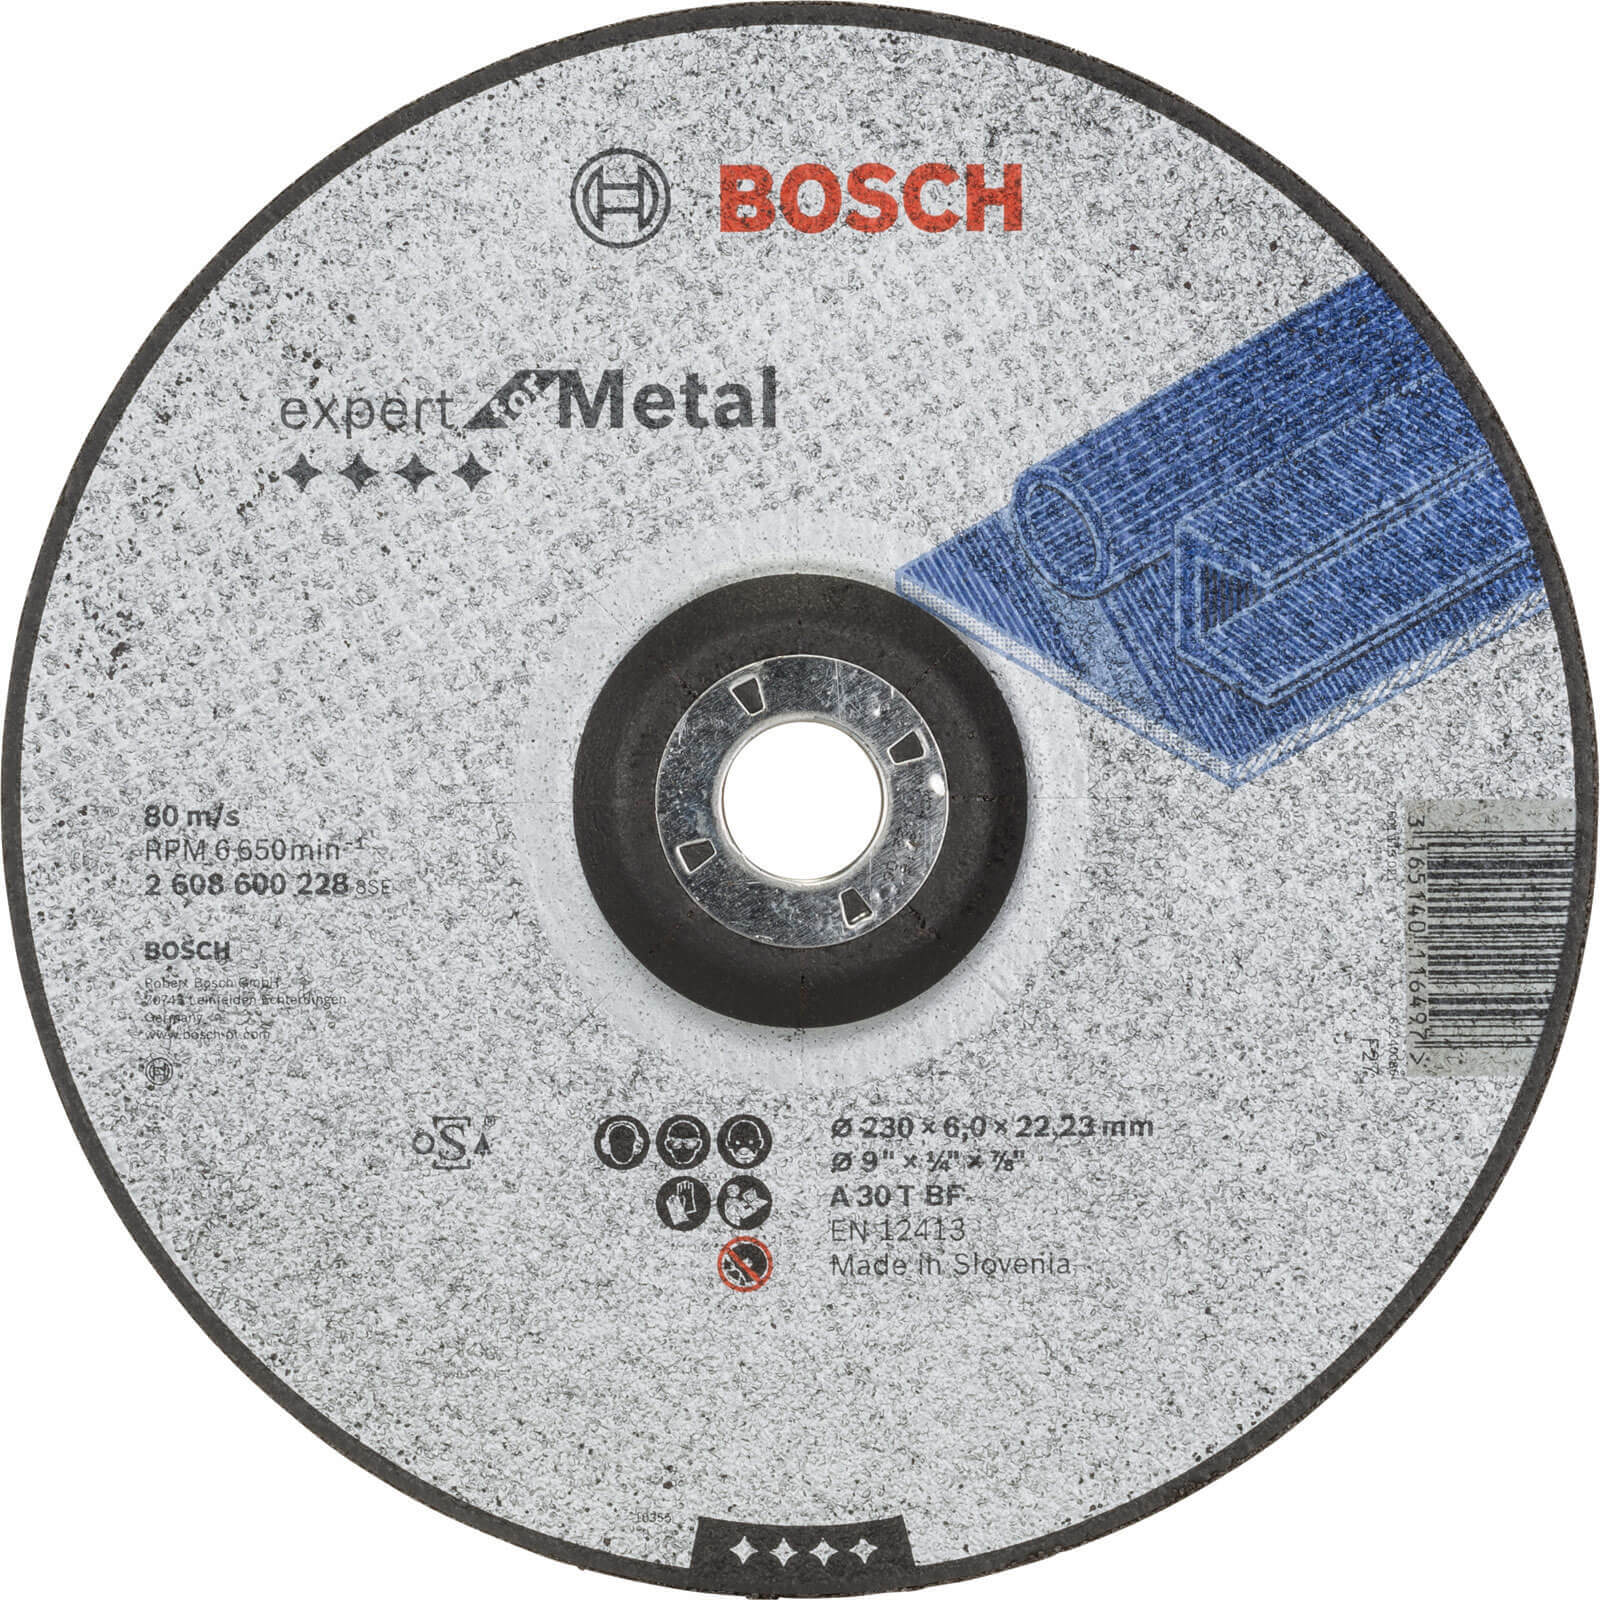 Photo of Bosch A30t Bf Drepressed Centre Metal Grinding Disc 230mm